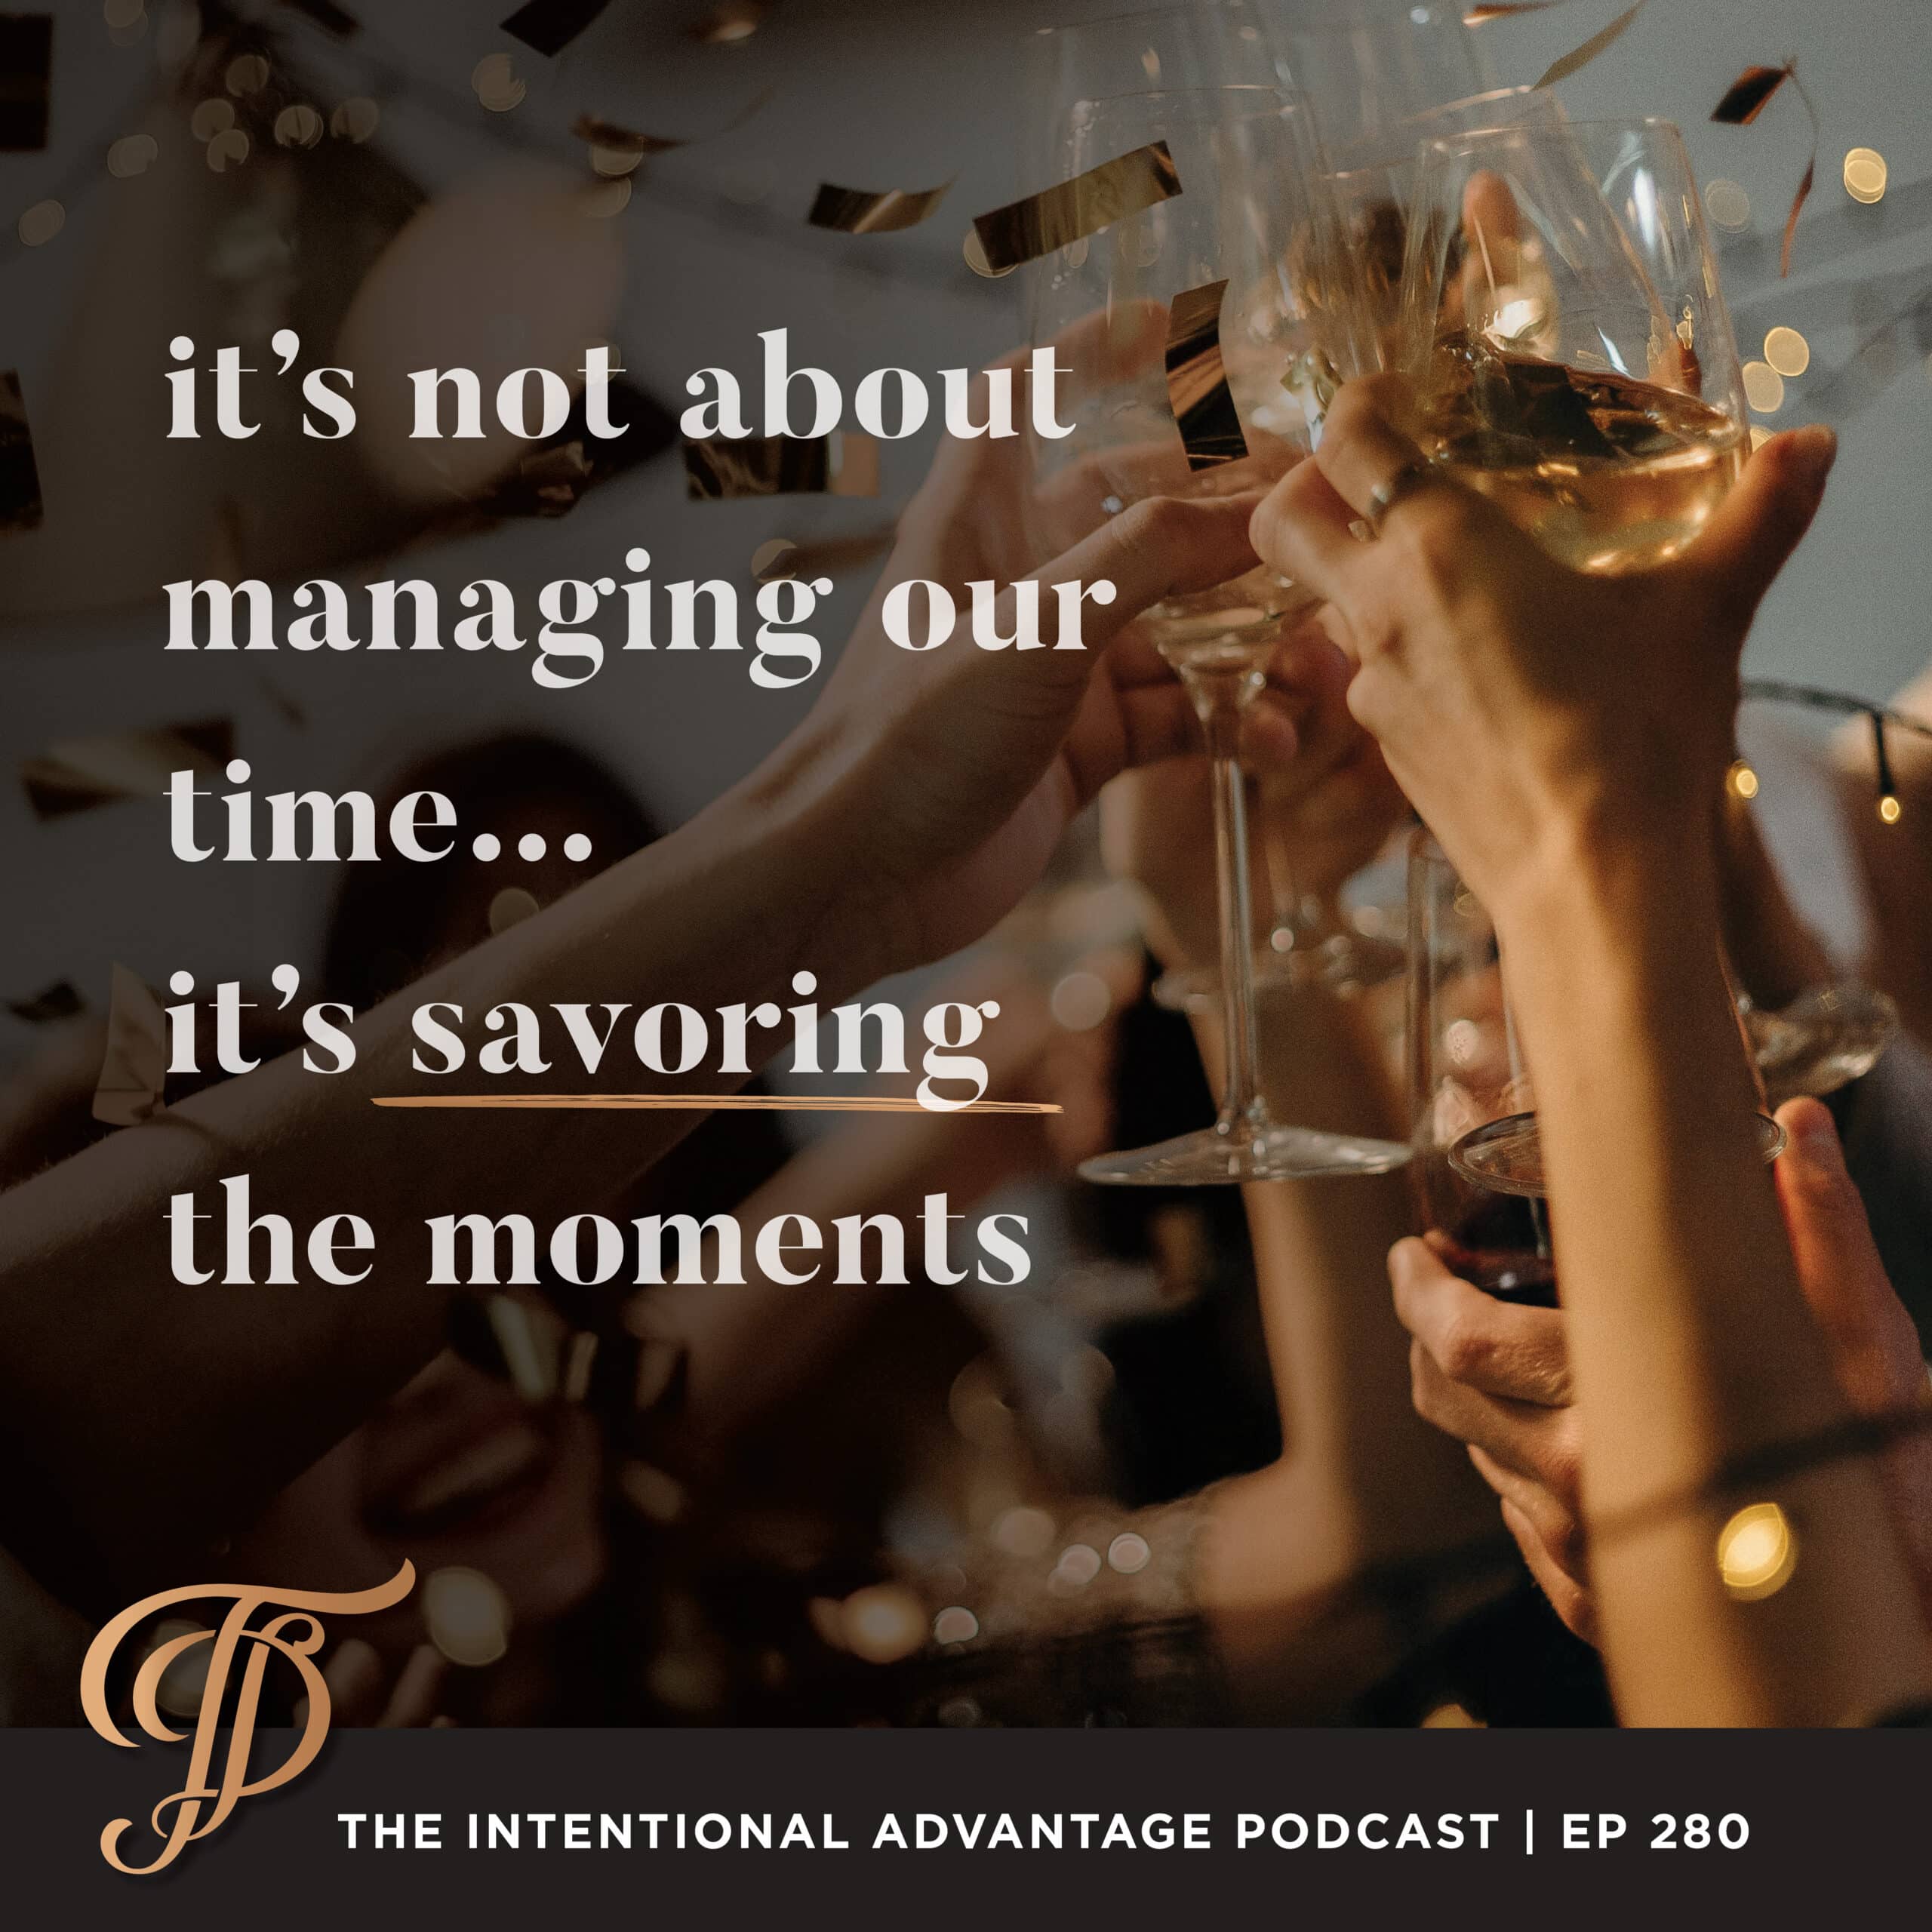 it's-not-about-managing-your-time-it's-savoring-the-moments-intentional-advantage-podcast-tanya-dalton